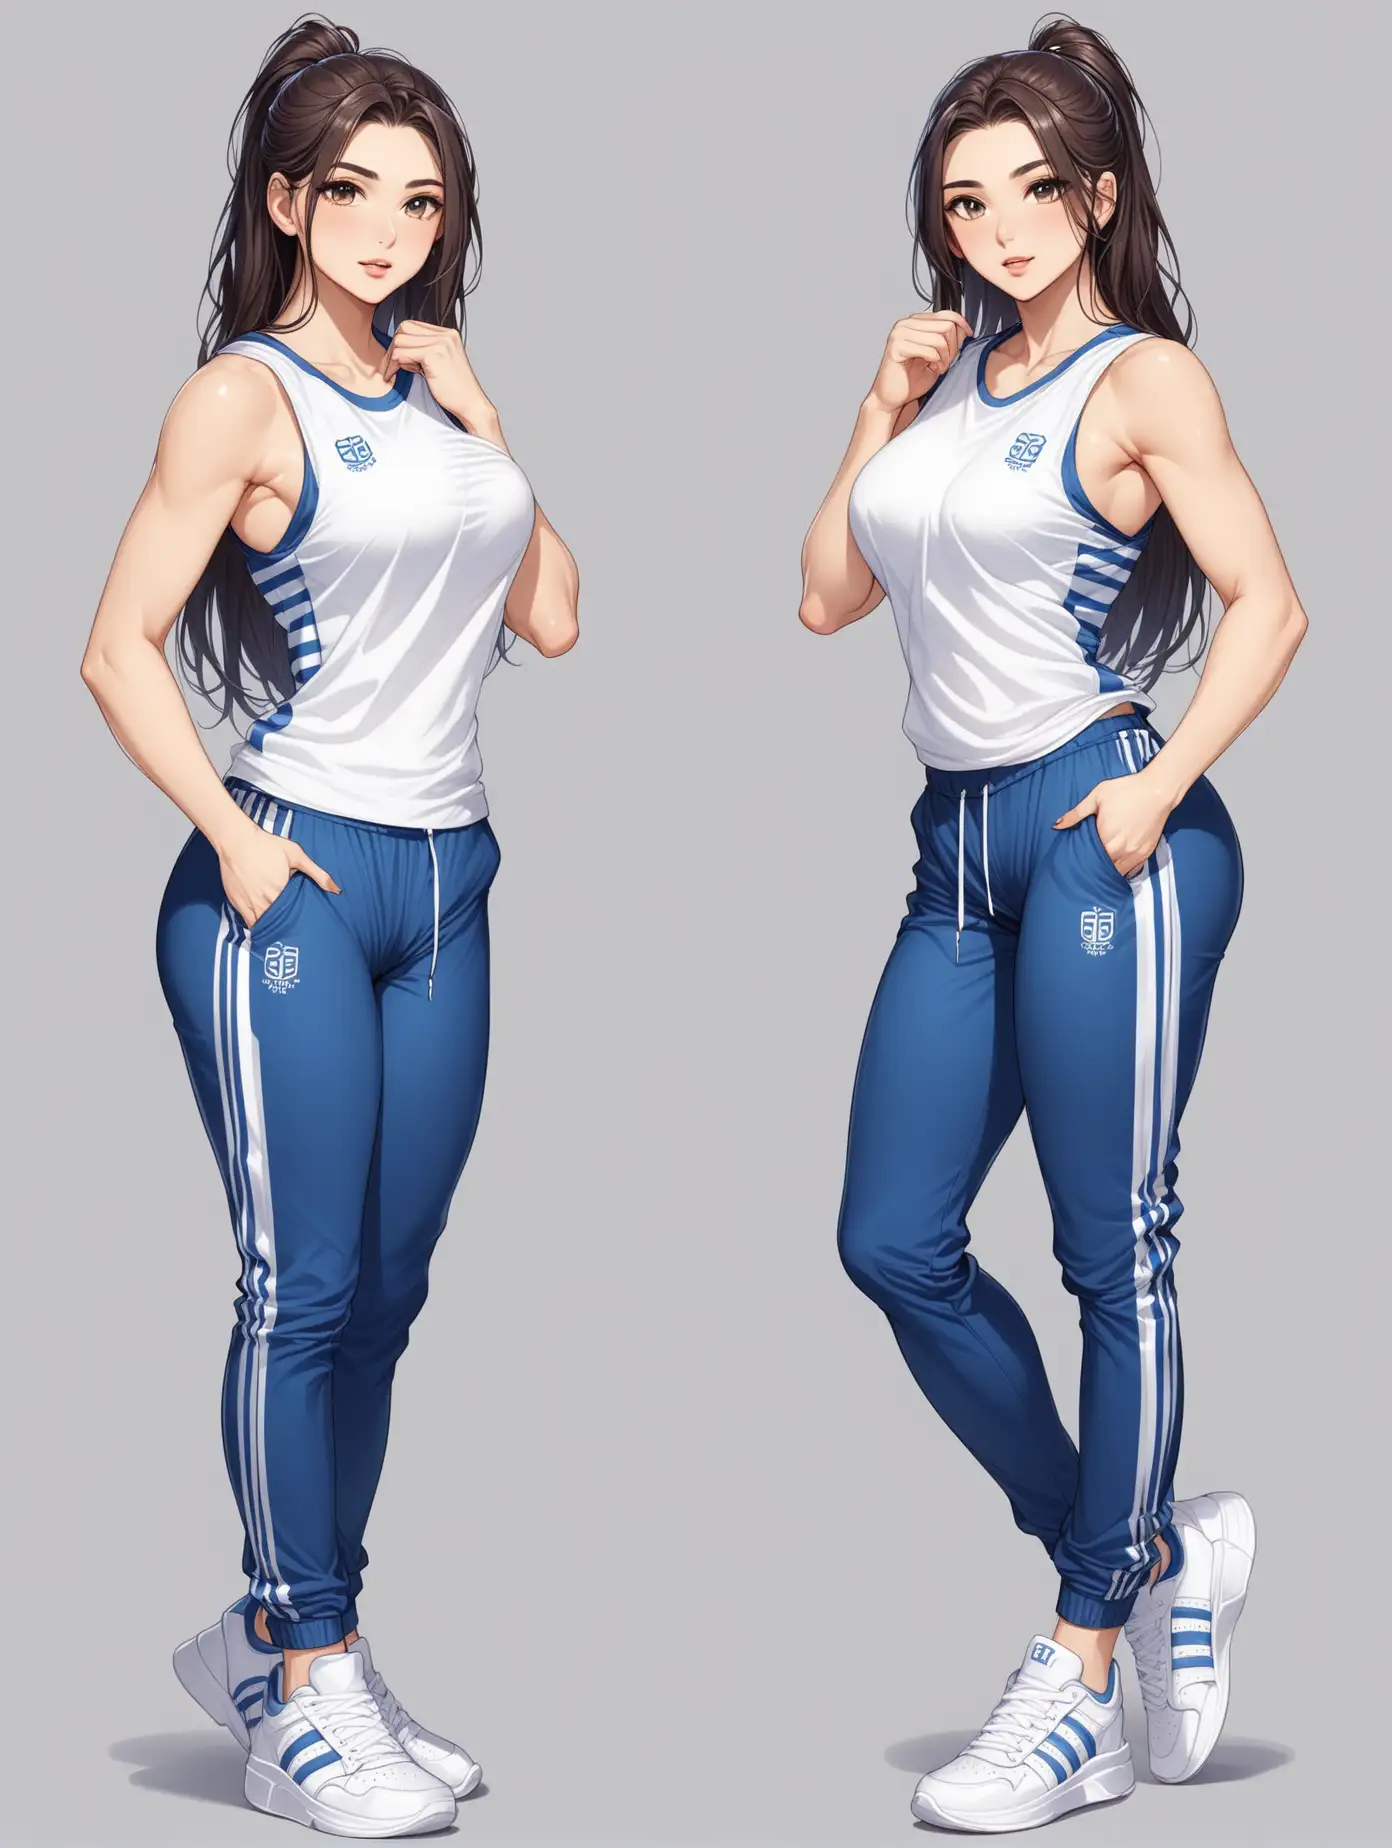 Sensual greek olympics girl wearing trainers pants and sneakers, full body, 2 poses